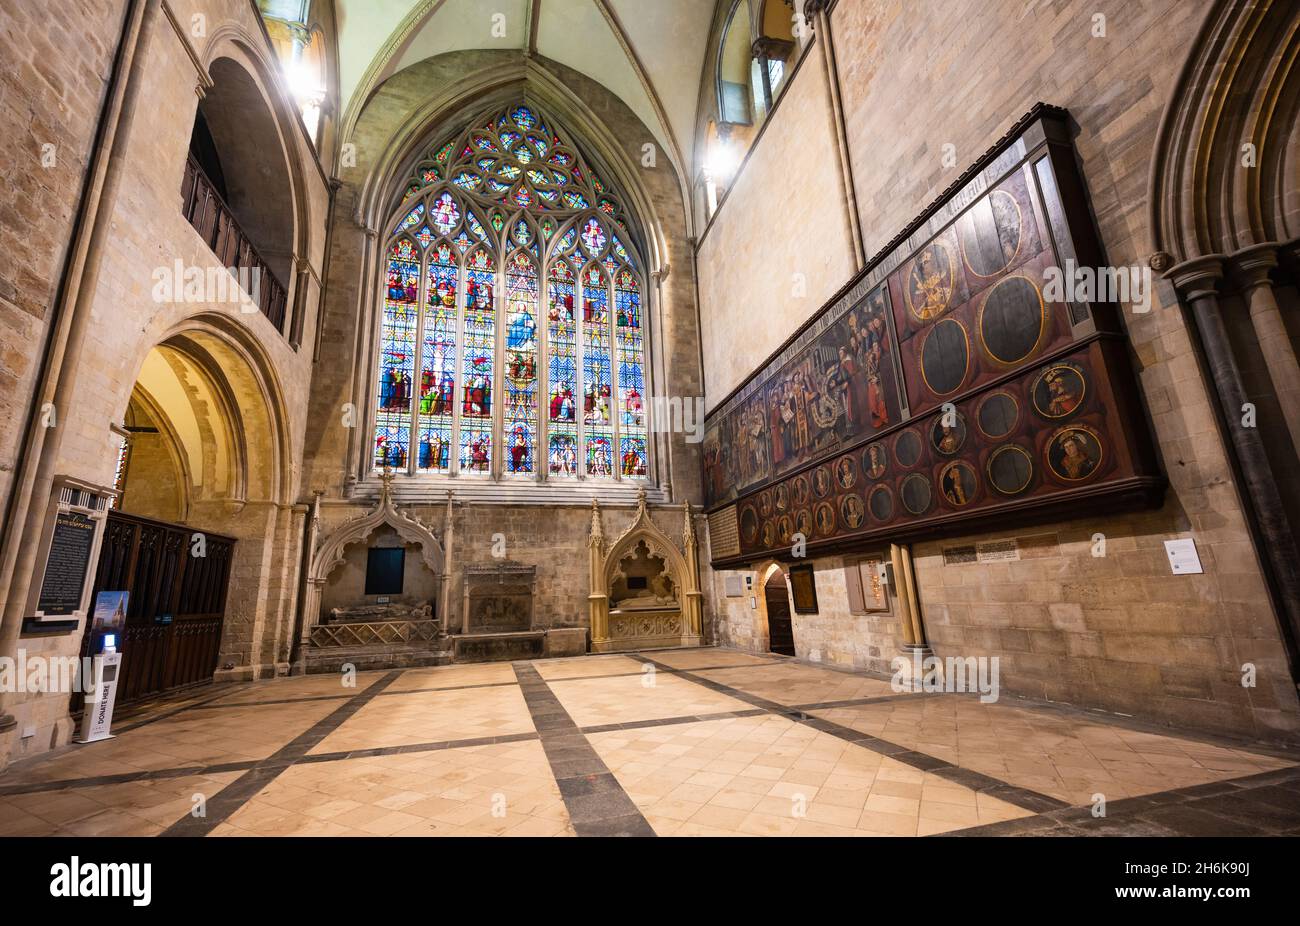 South Transept with stained glass window & Tudor Charter Paintings in Chichester Cathedral. With thanks to The Dean & Chapter of Chichester Cathedral. Stock Photo